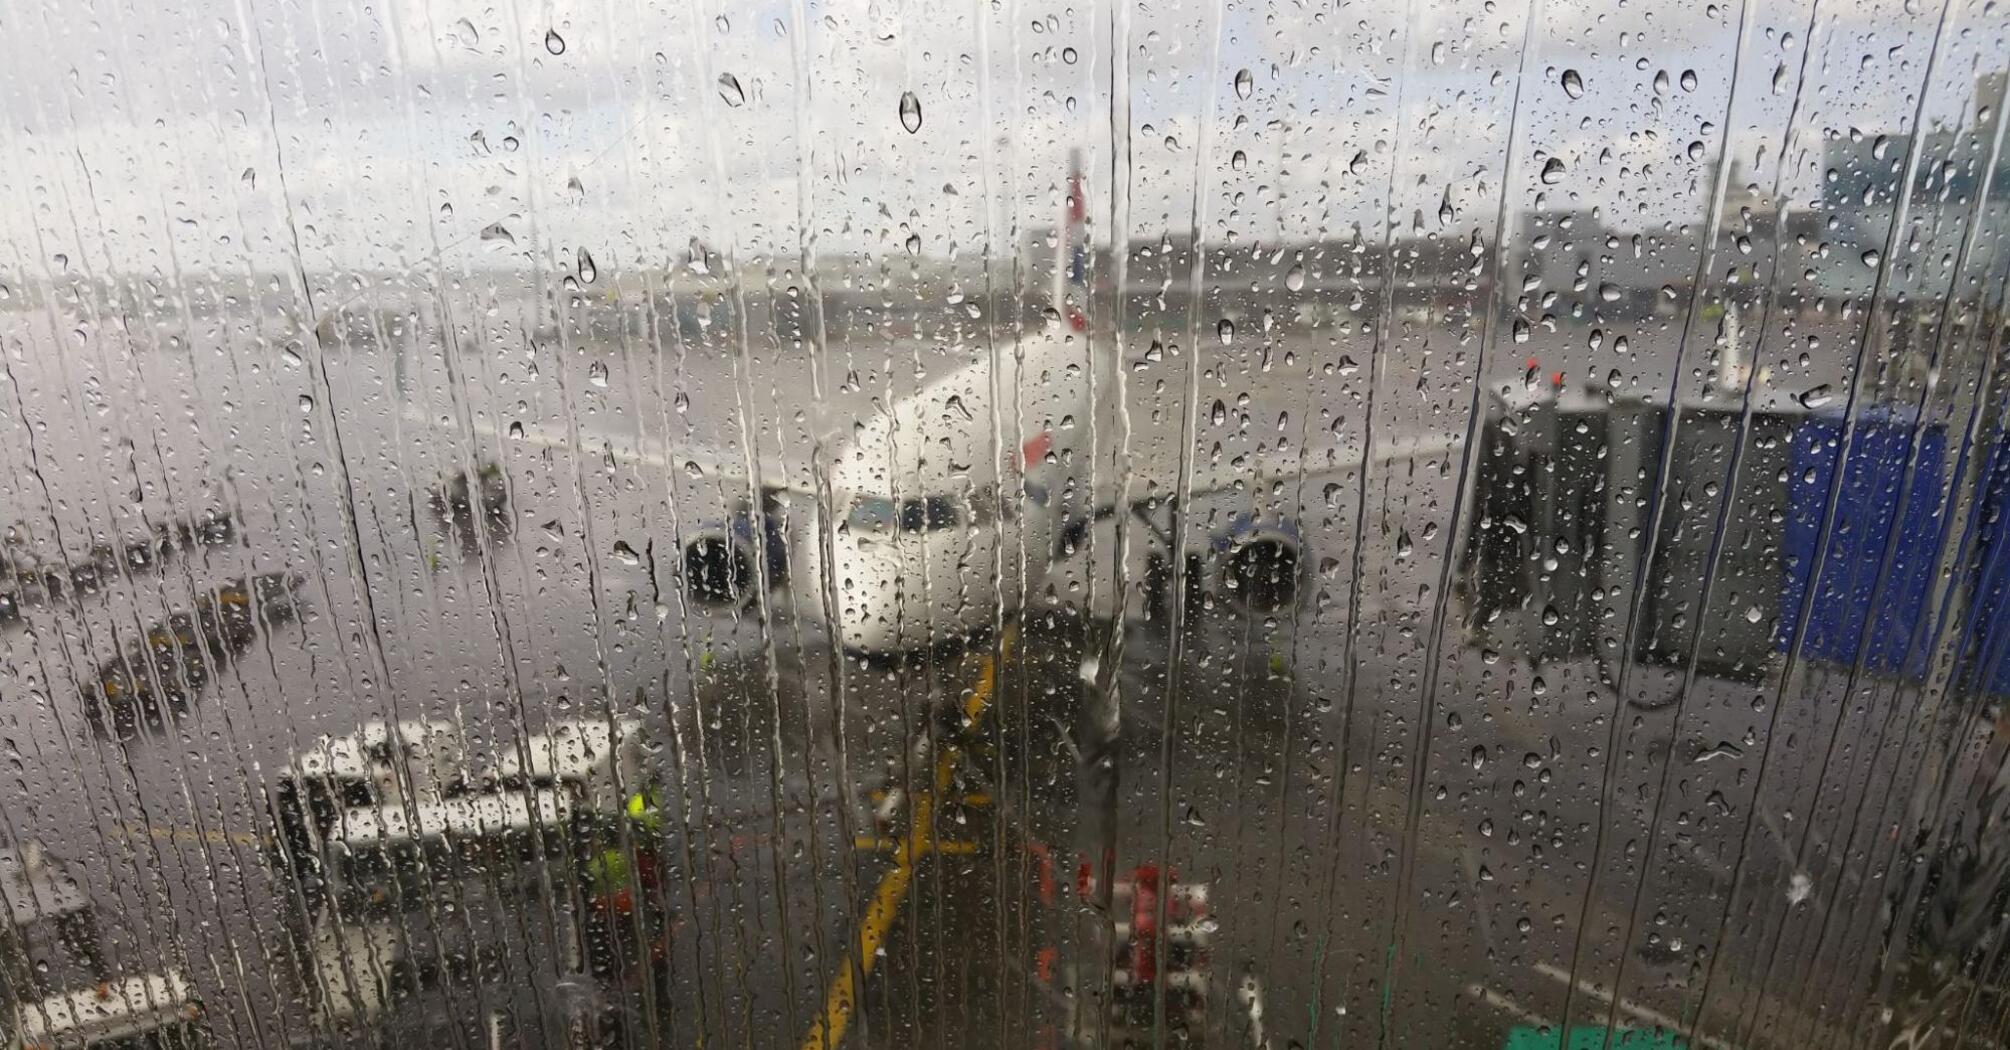 Airplane outside a wet window